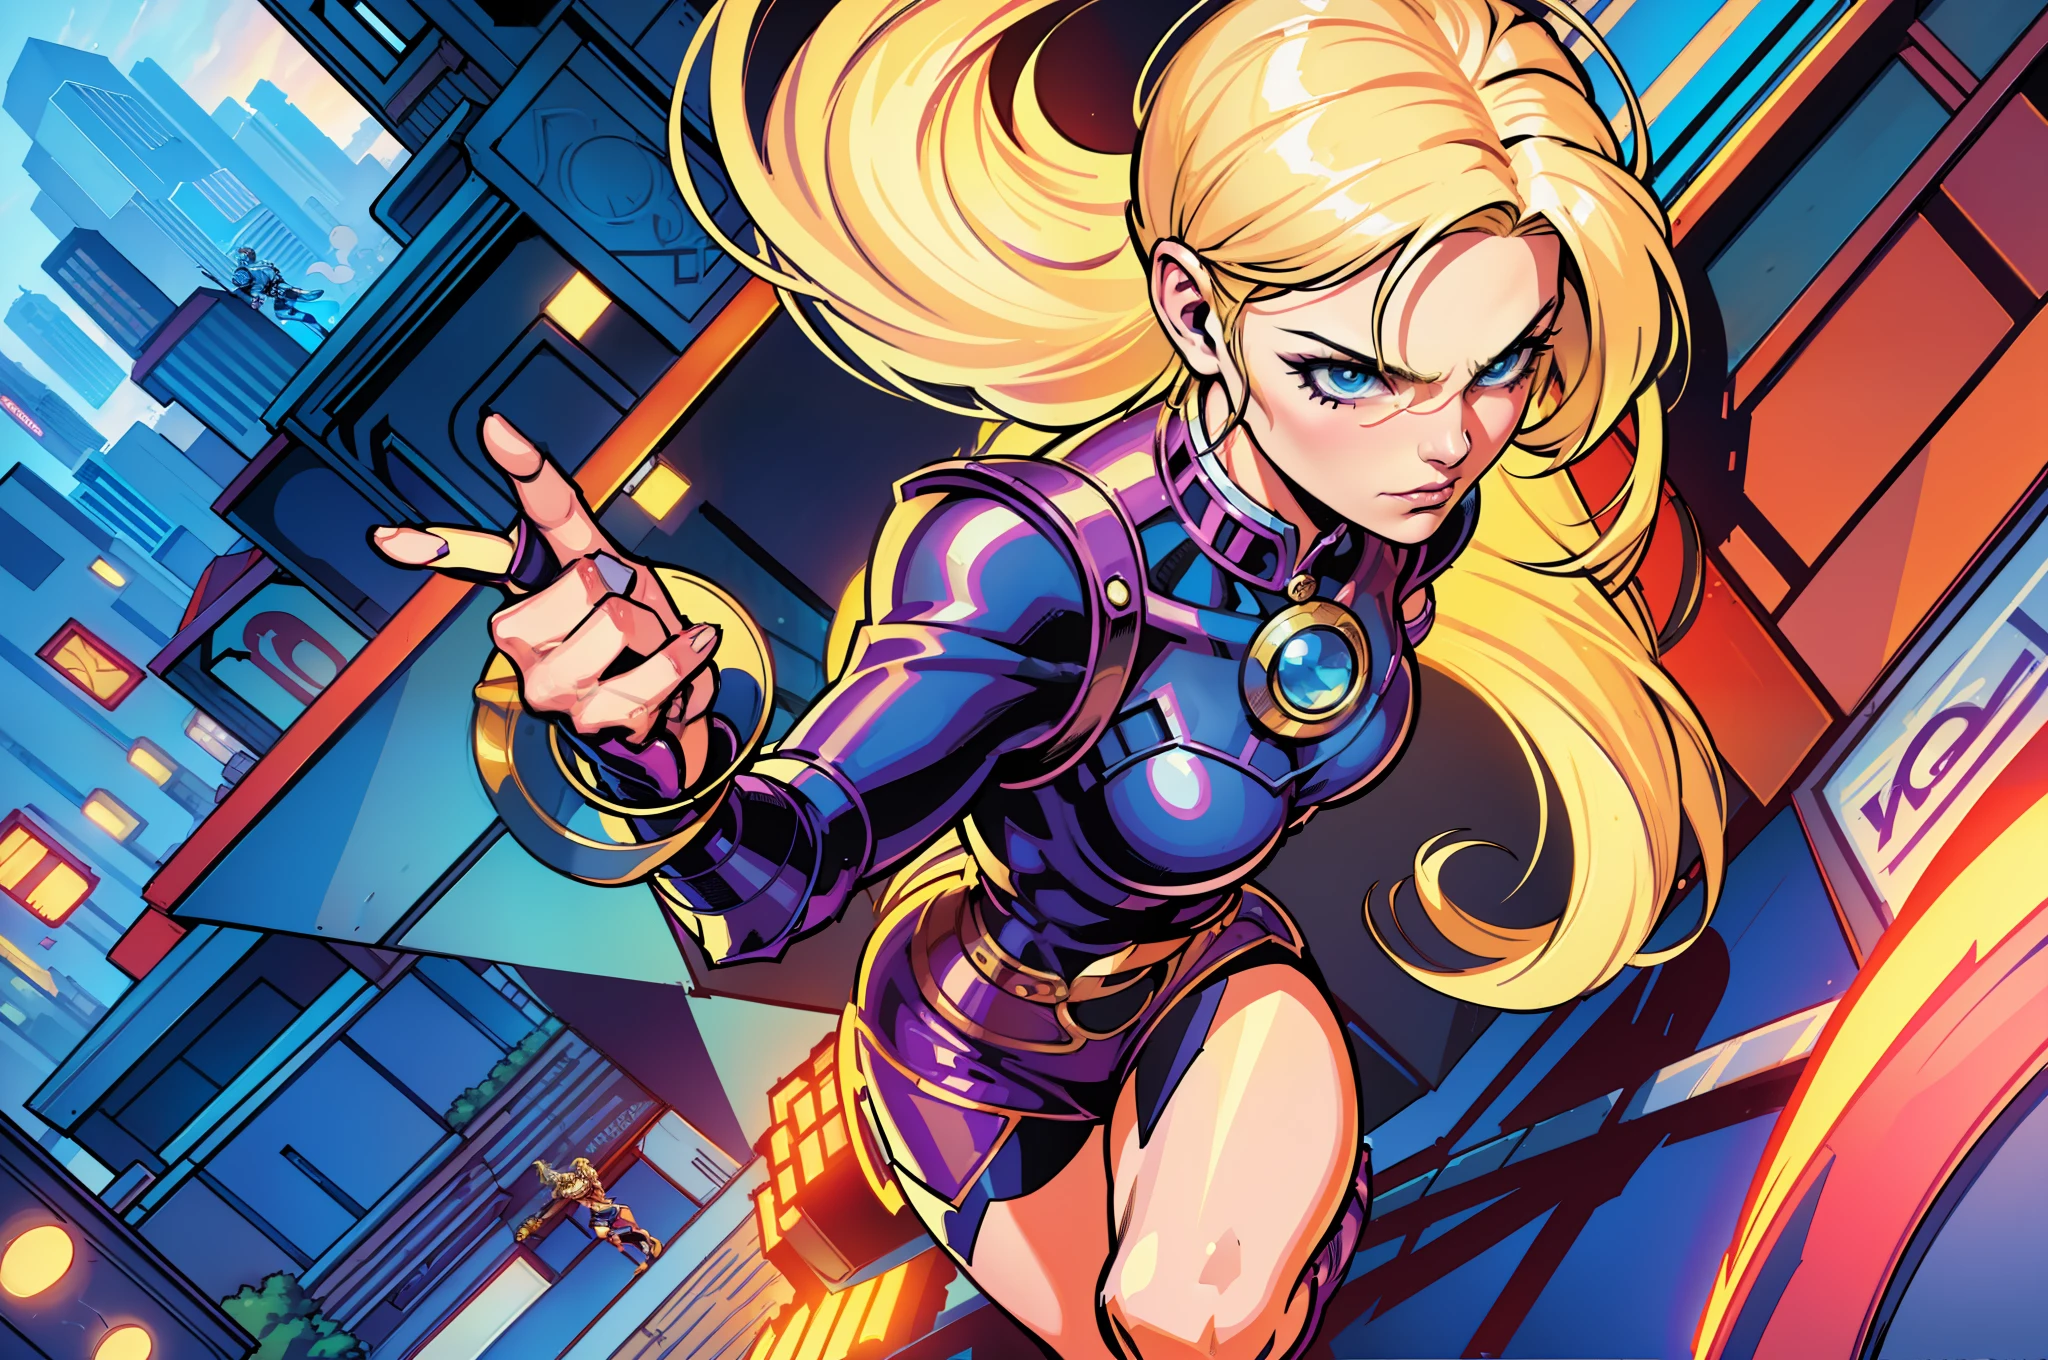 (a blonde heroine landing on a busy street:1.2), (high quality, super detailed, branded by Stan Lee, Jim Lee and Joe Bennet), Super Fantasias-Blue and white trademarked hero, (, a fearless look), (League of legends style comics), with a modern city backdrop, (busy streets, tall buildings, ).